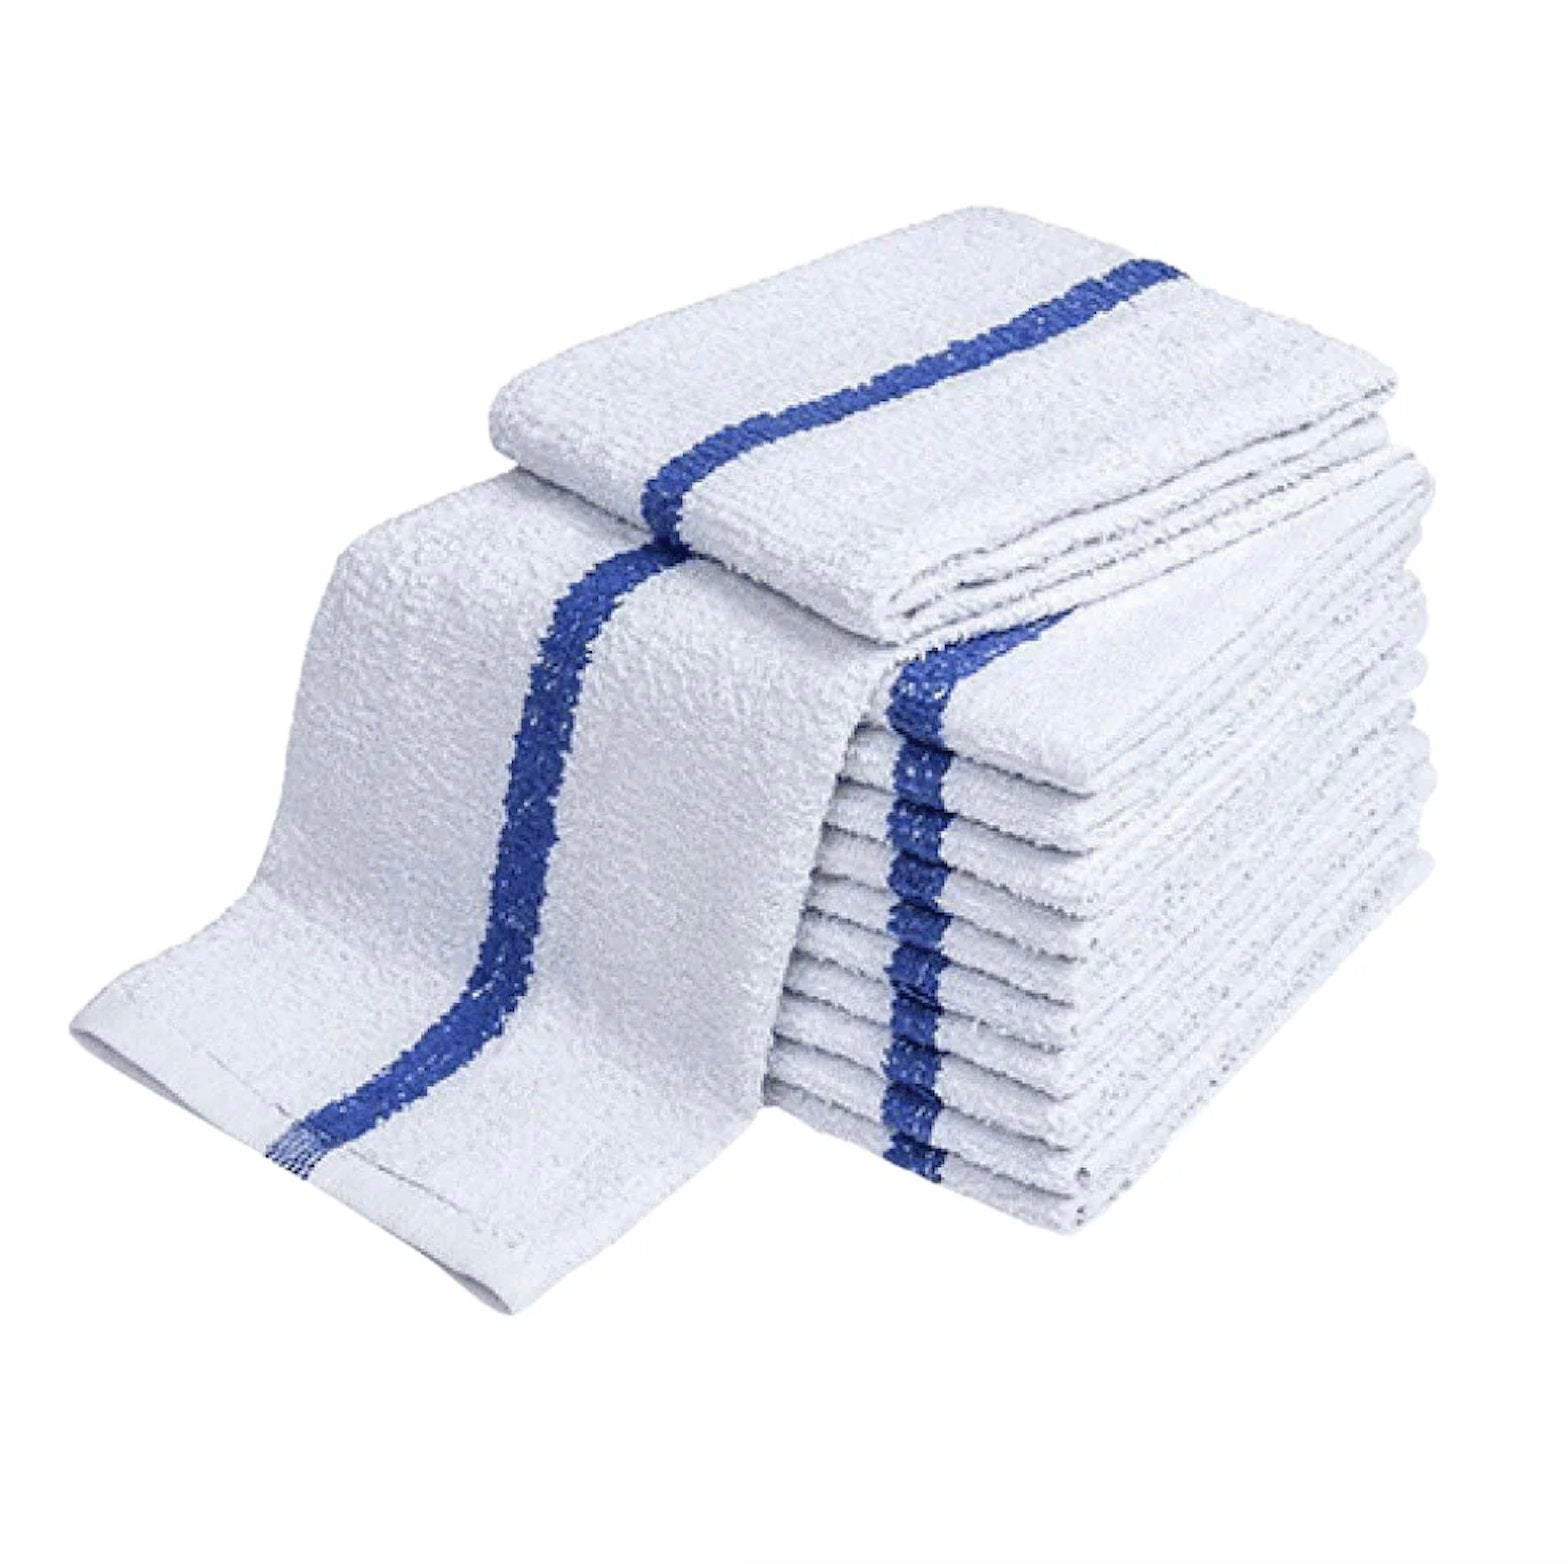 Ideal Hospitality Grade Pool towel || Quick-drying, absorbent towels for your active lifestyle.